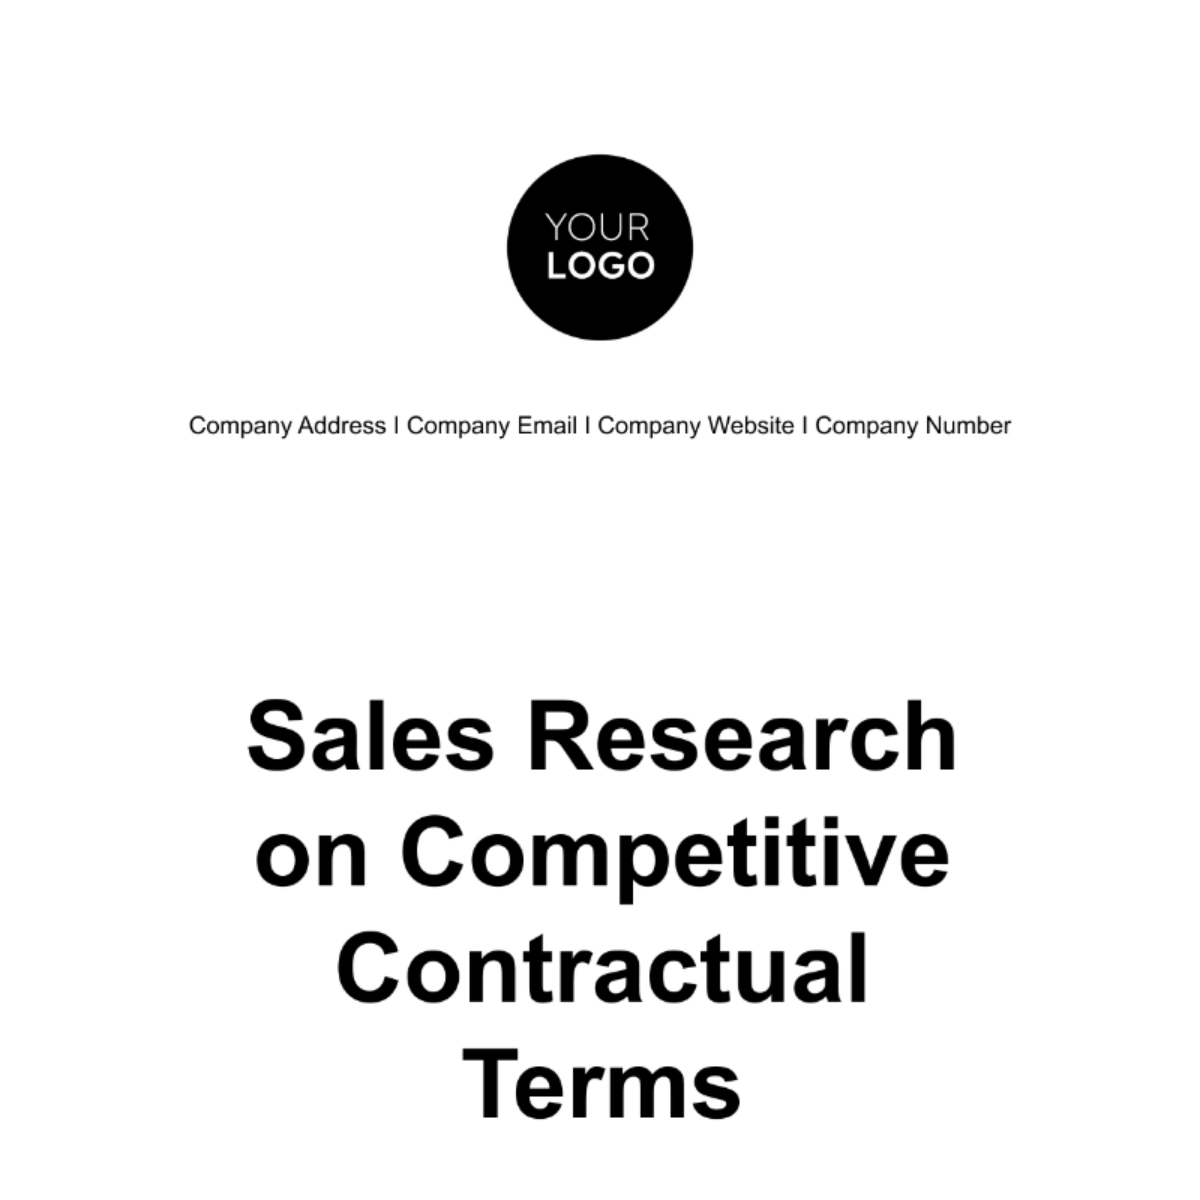 Free Sales Research on Competitive Contractual Terms Template